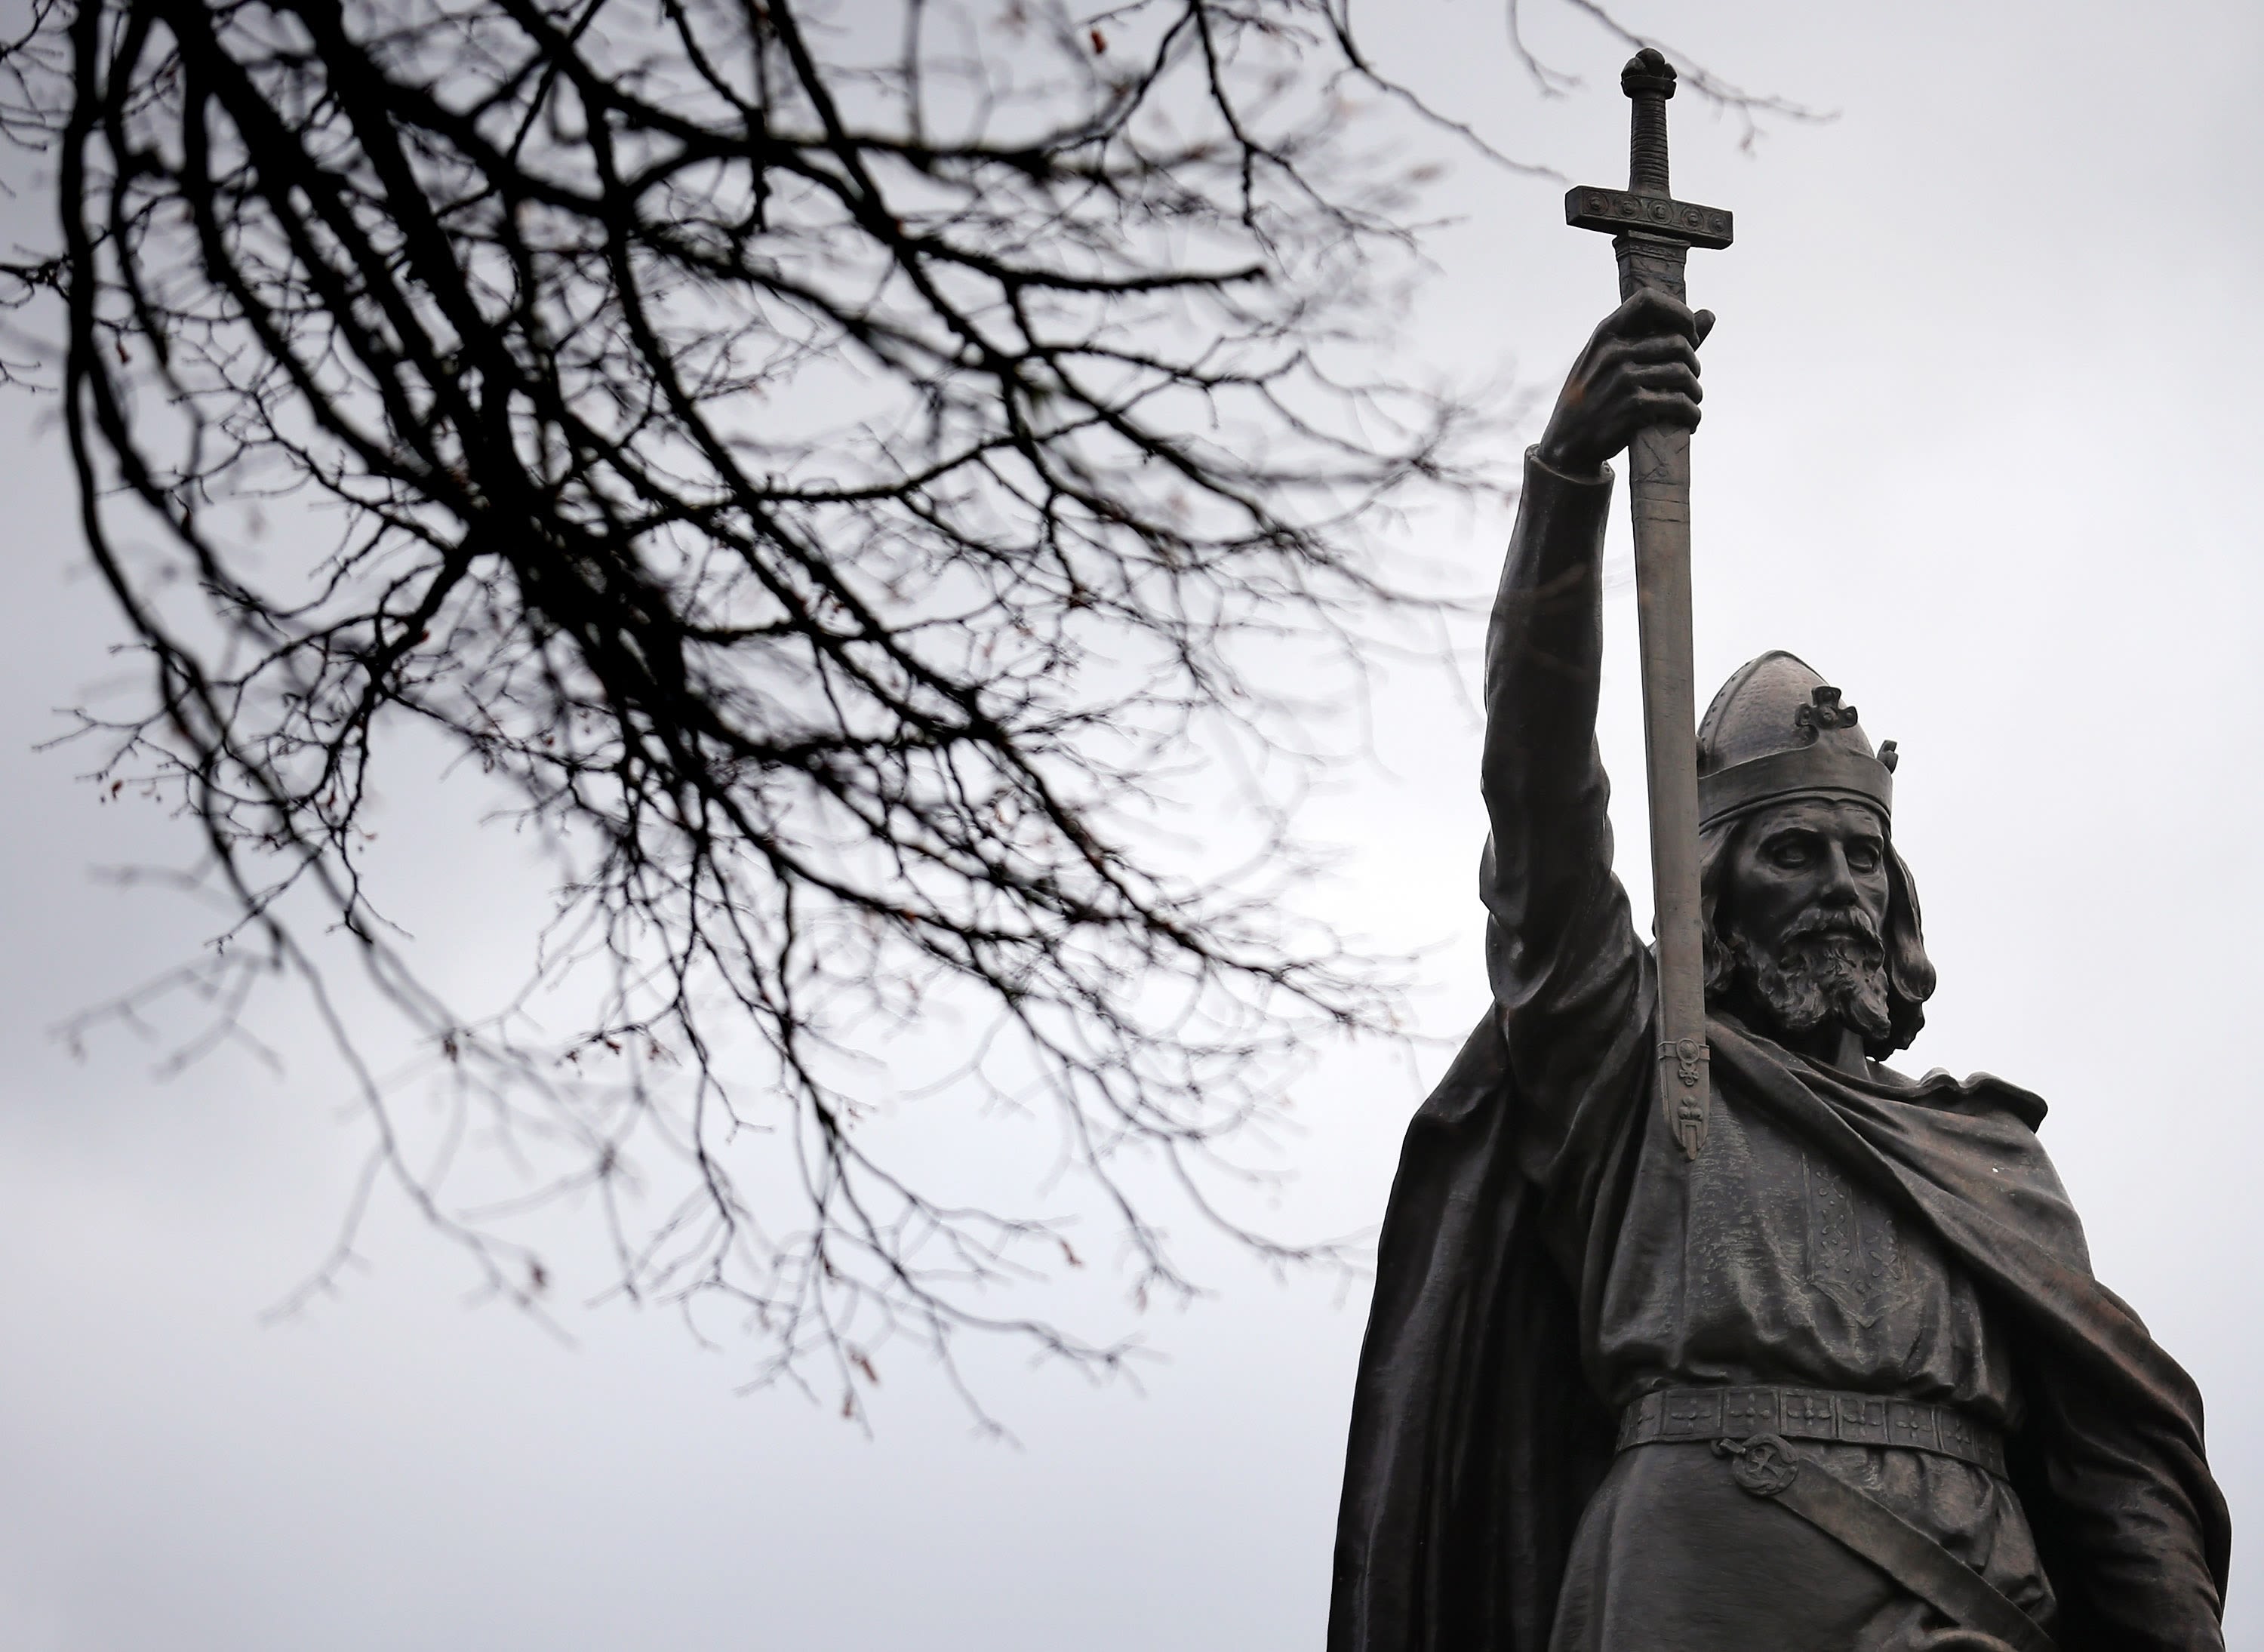 Bones of King Alfred the Great believed to have been found in a